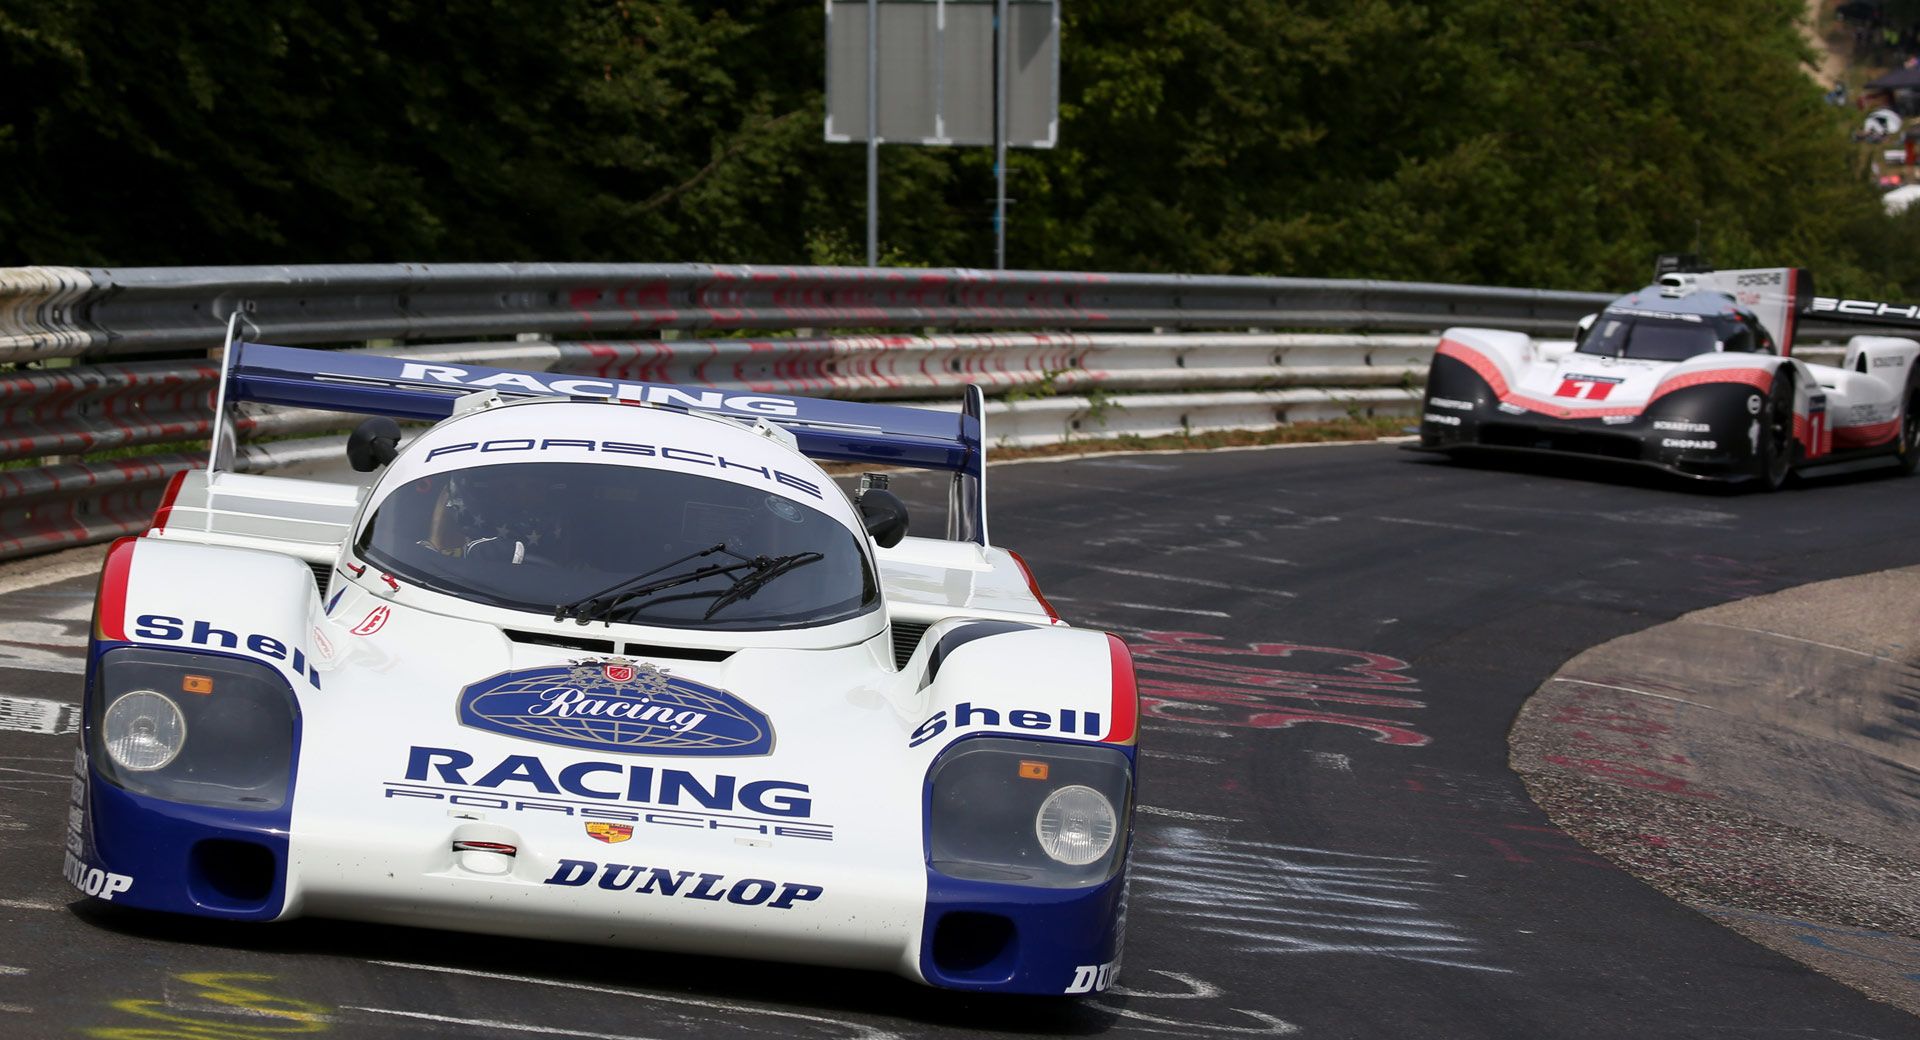 Watch The Porsche 919 And 956 Lap The Nurburgring In